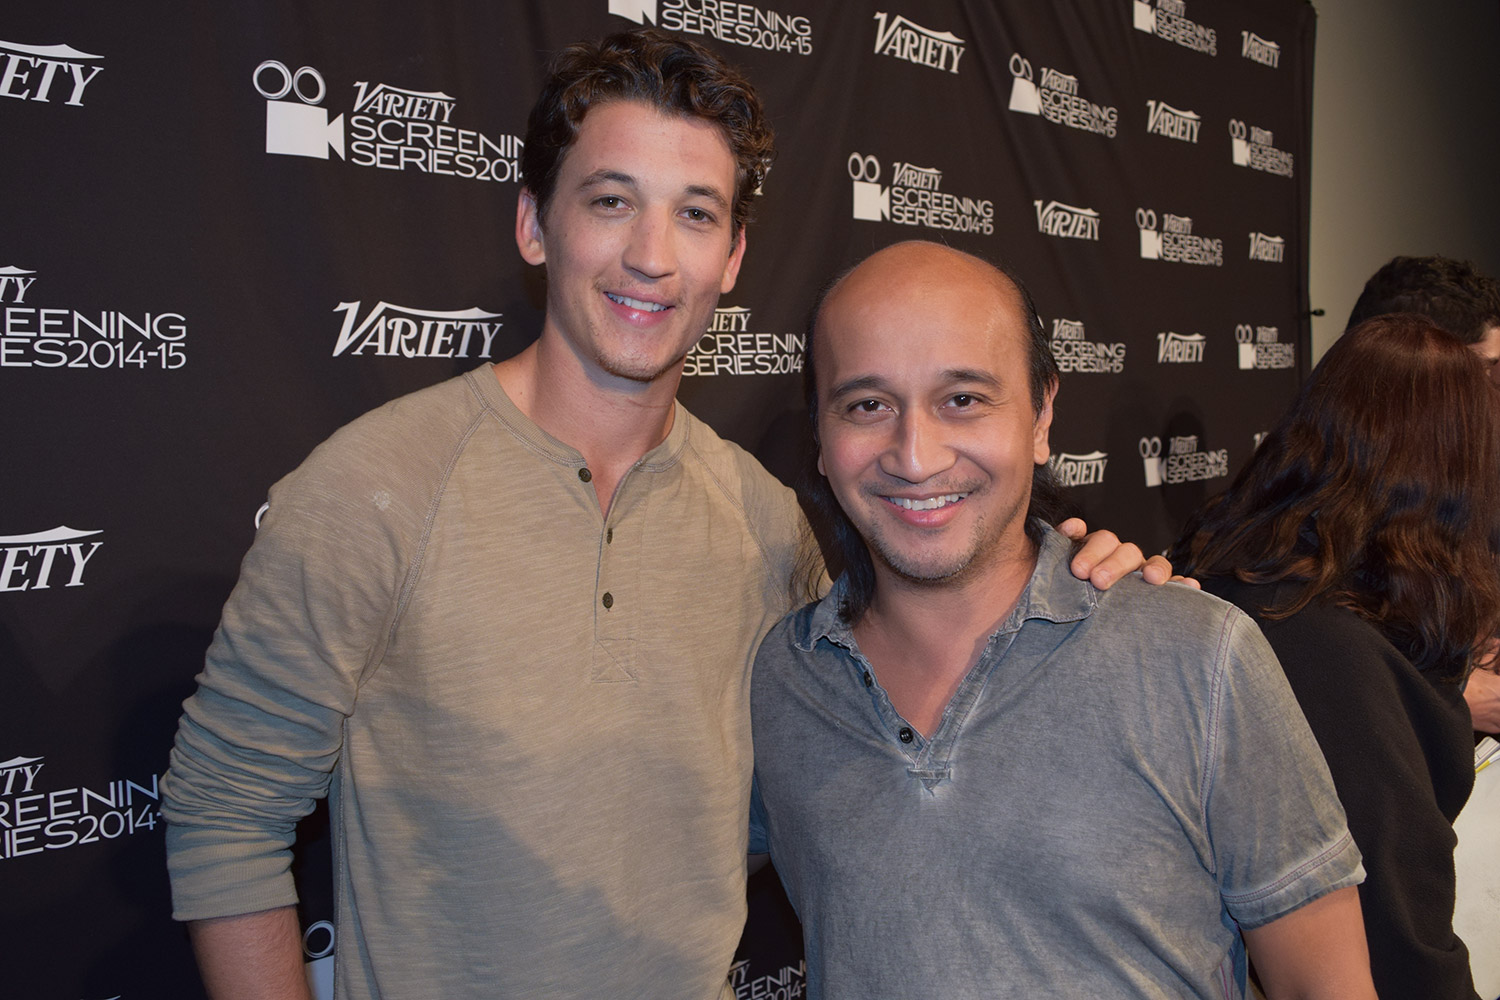 With Miles Teller